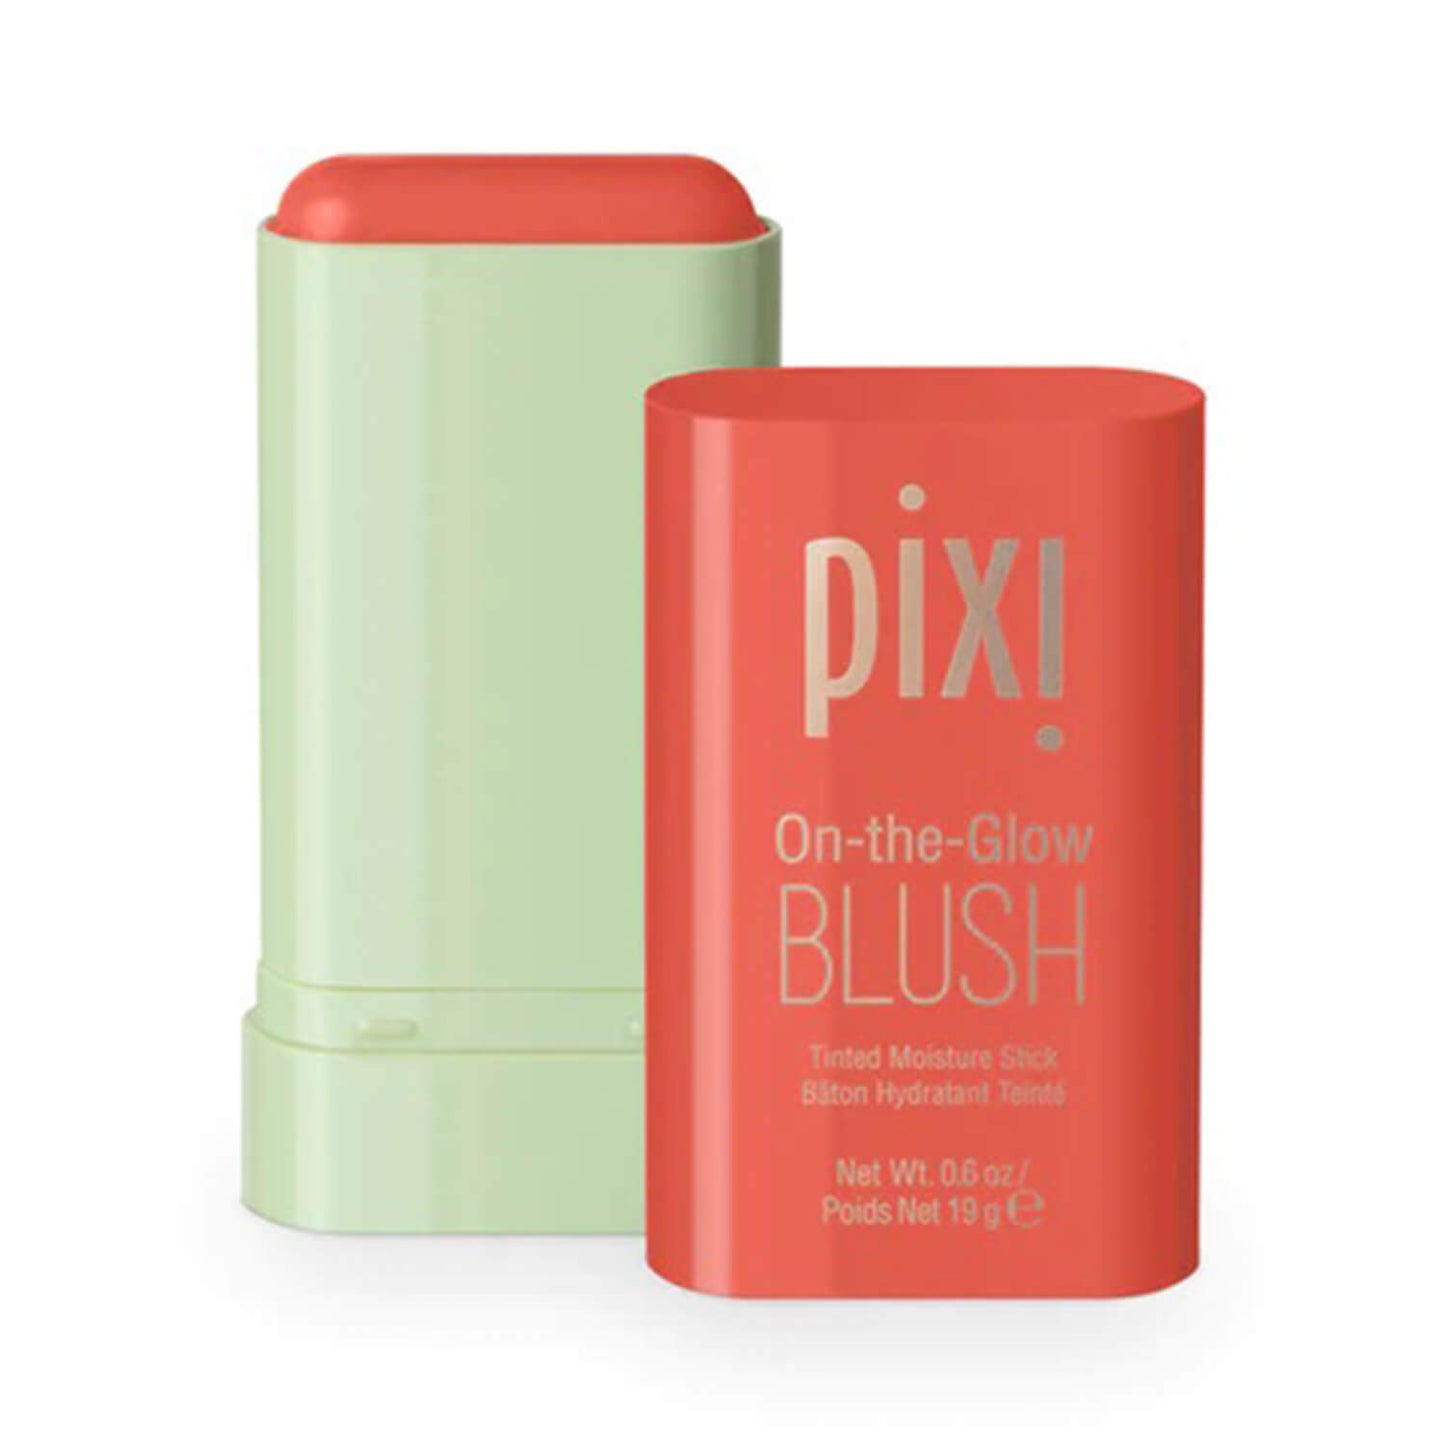 Shop Pixi On-the-Glow Blush in Juicy shade available at Heygirl.pk for delivery in Pakistan. 